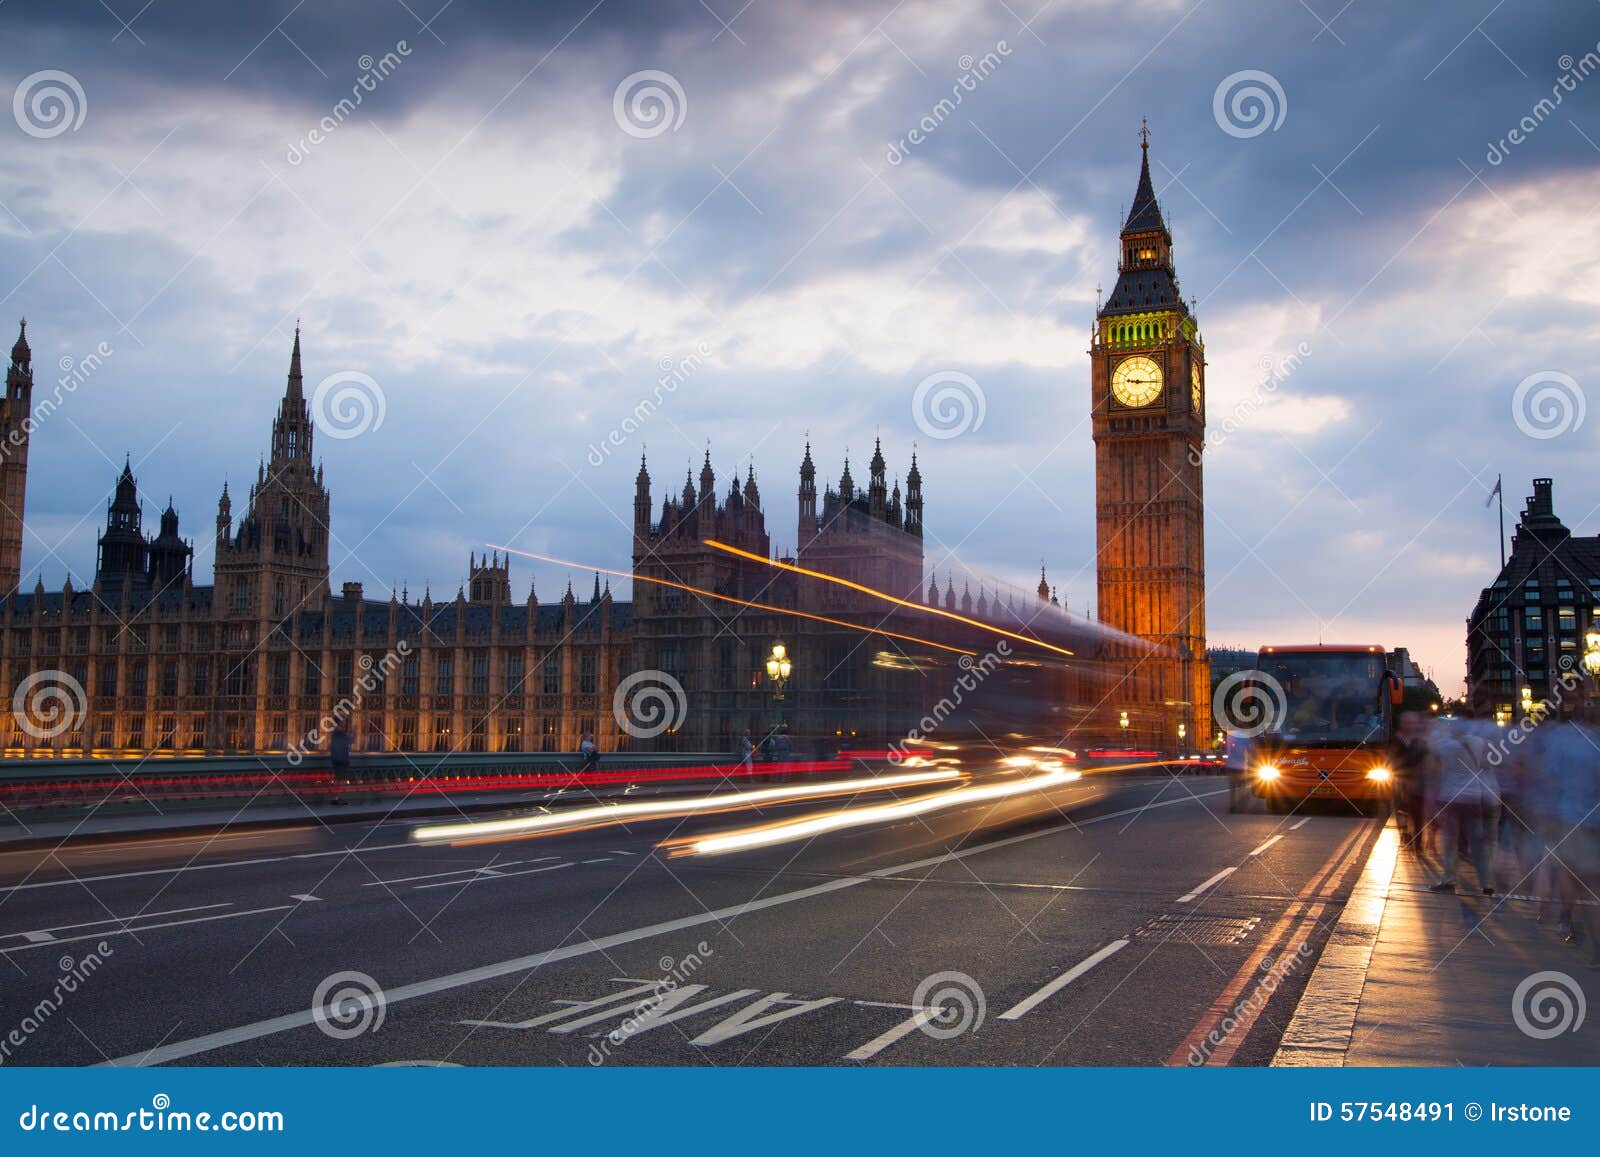 London Sunset. Big Ben and Houses of Parliament Editorial Photo - Image ...